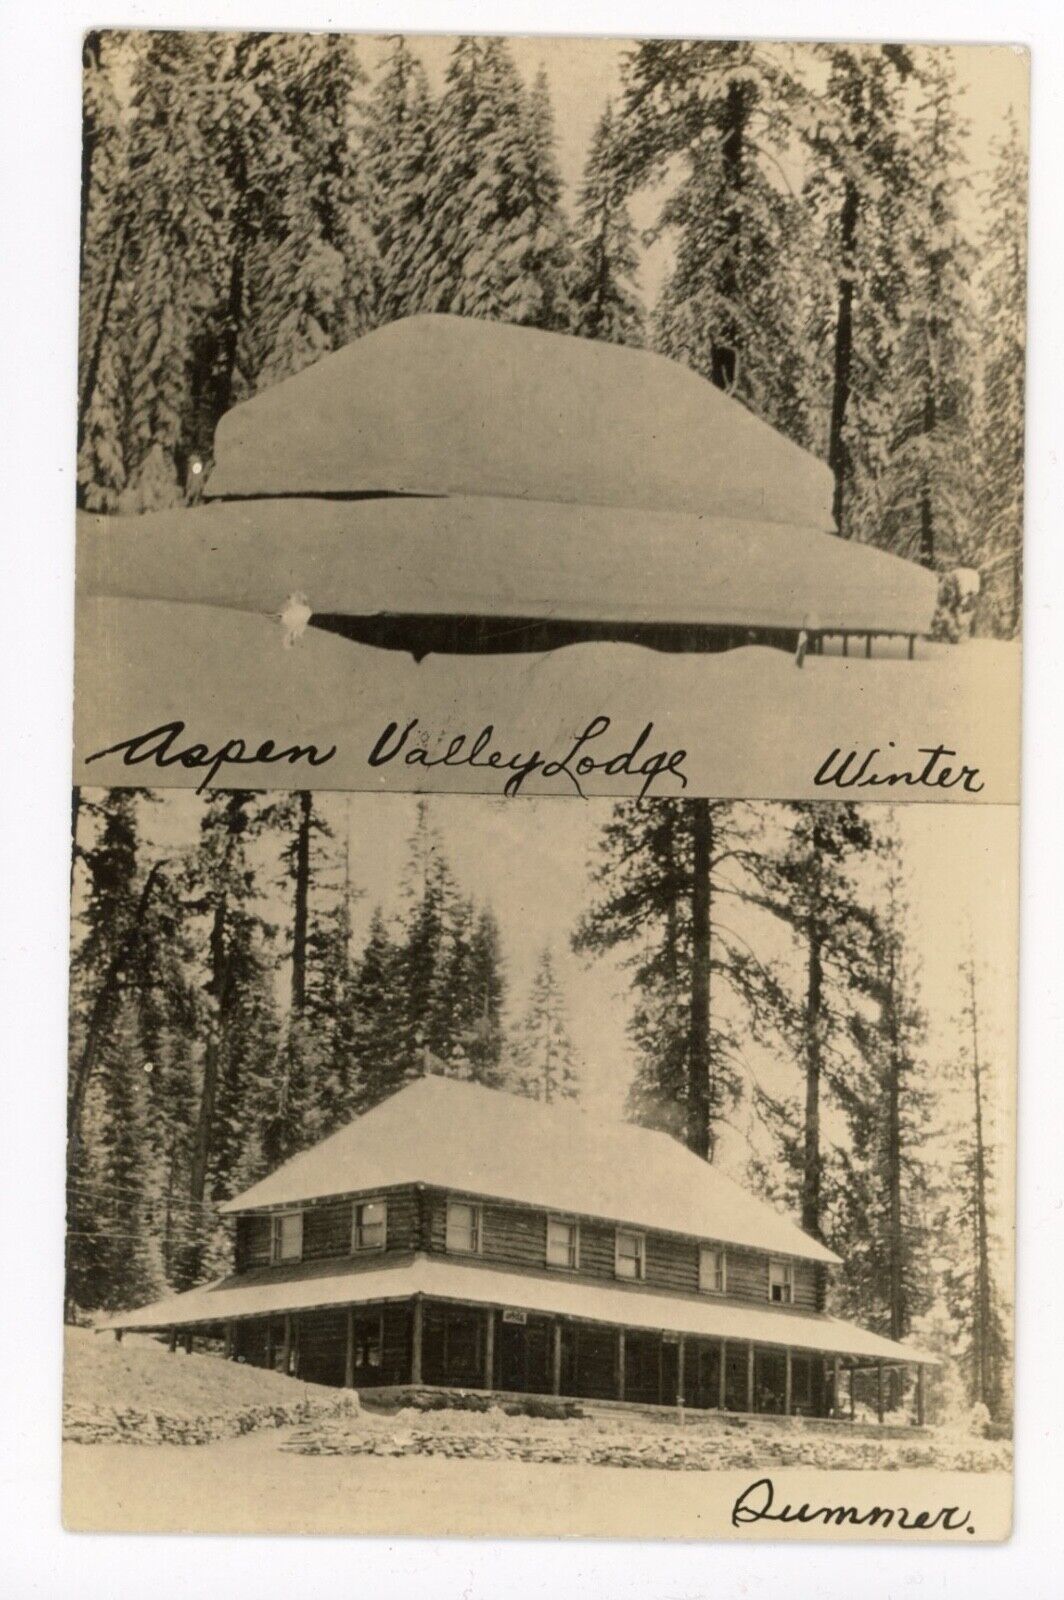 CO, Aspen. ASPEN VALLEY LODGE. Views in Winter and Summer. Real Photo Postcard